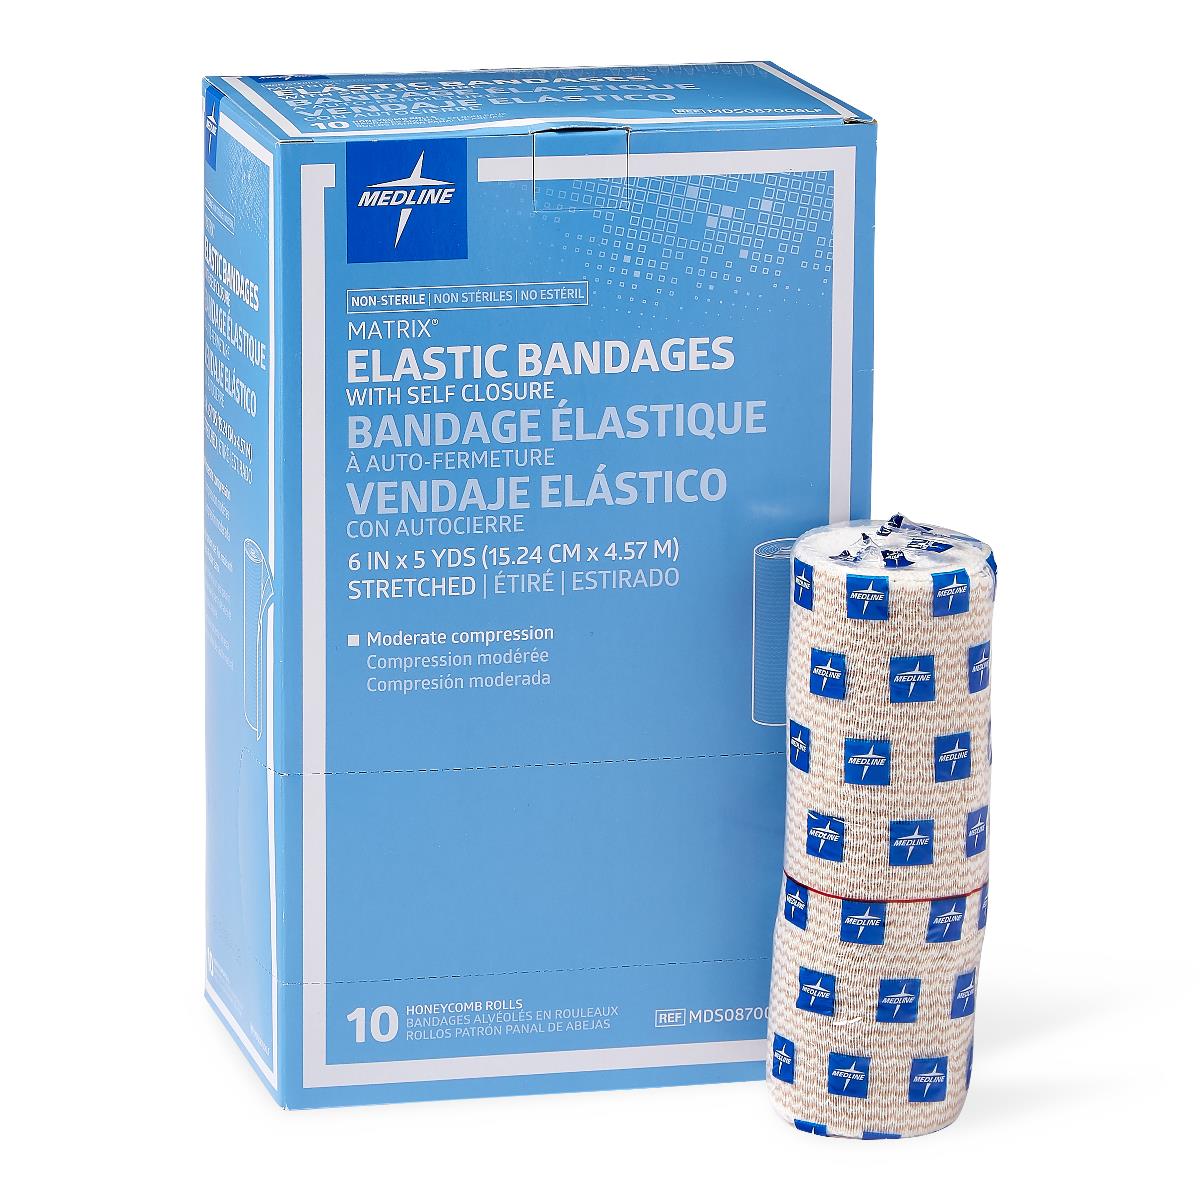 Matrix Elastic Bandage with Self-Closure, Stretched, Nonsterile, Various Sizes